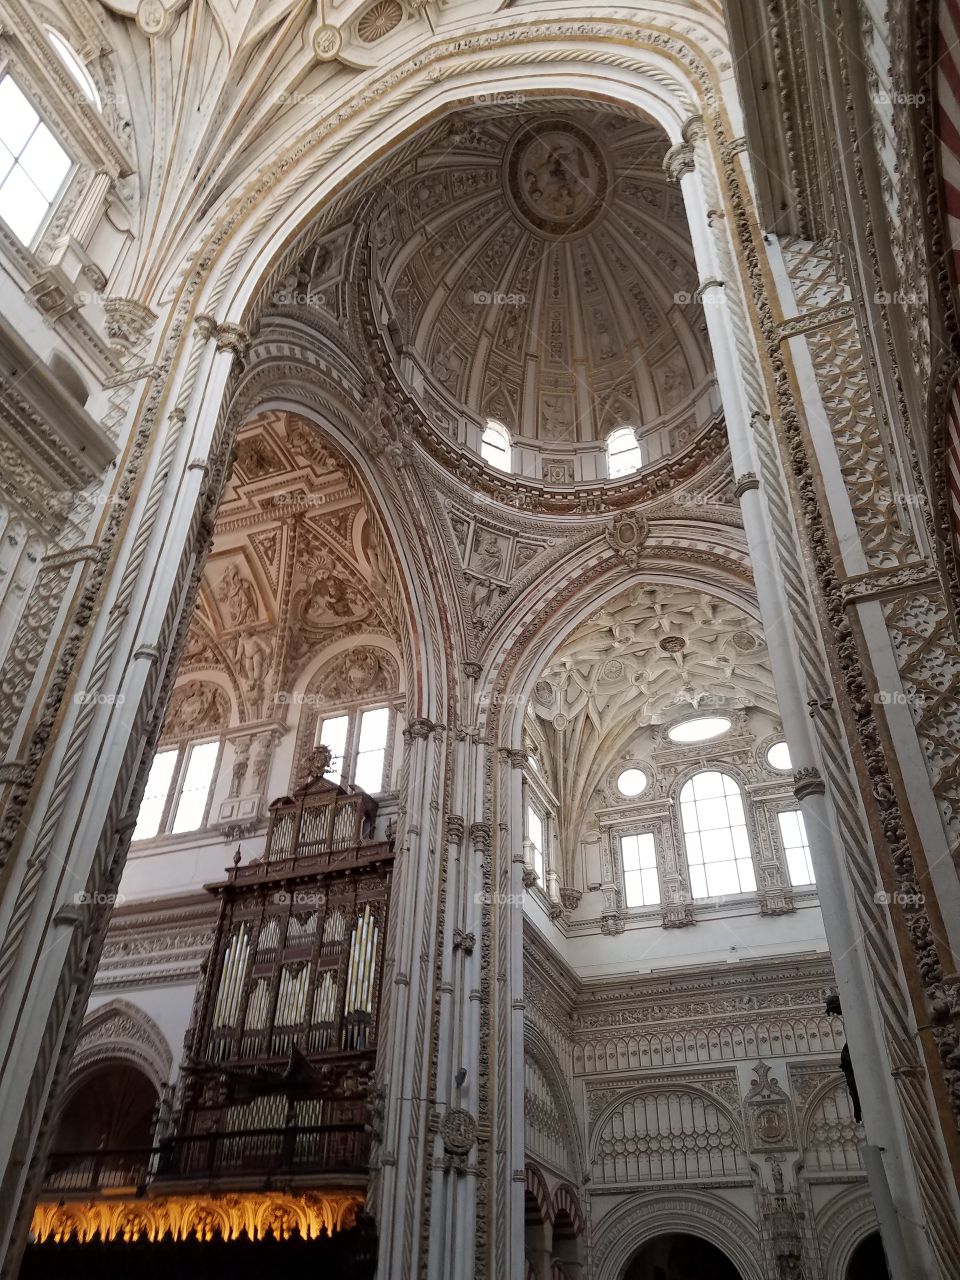 The Catedral in the Mezquita